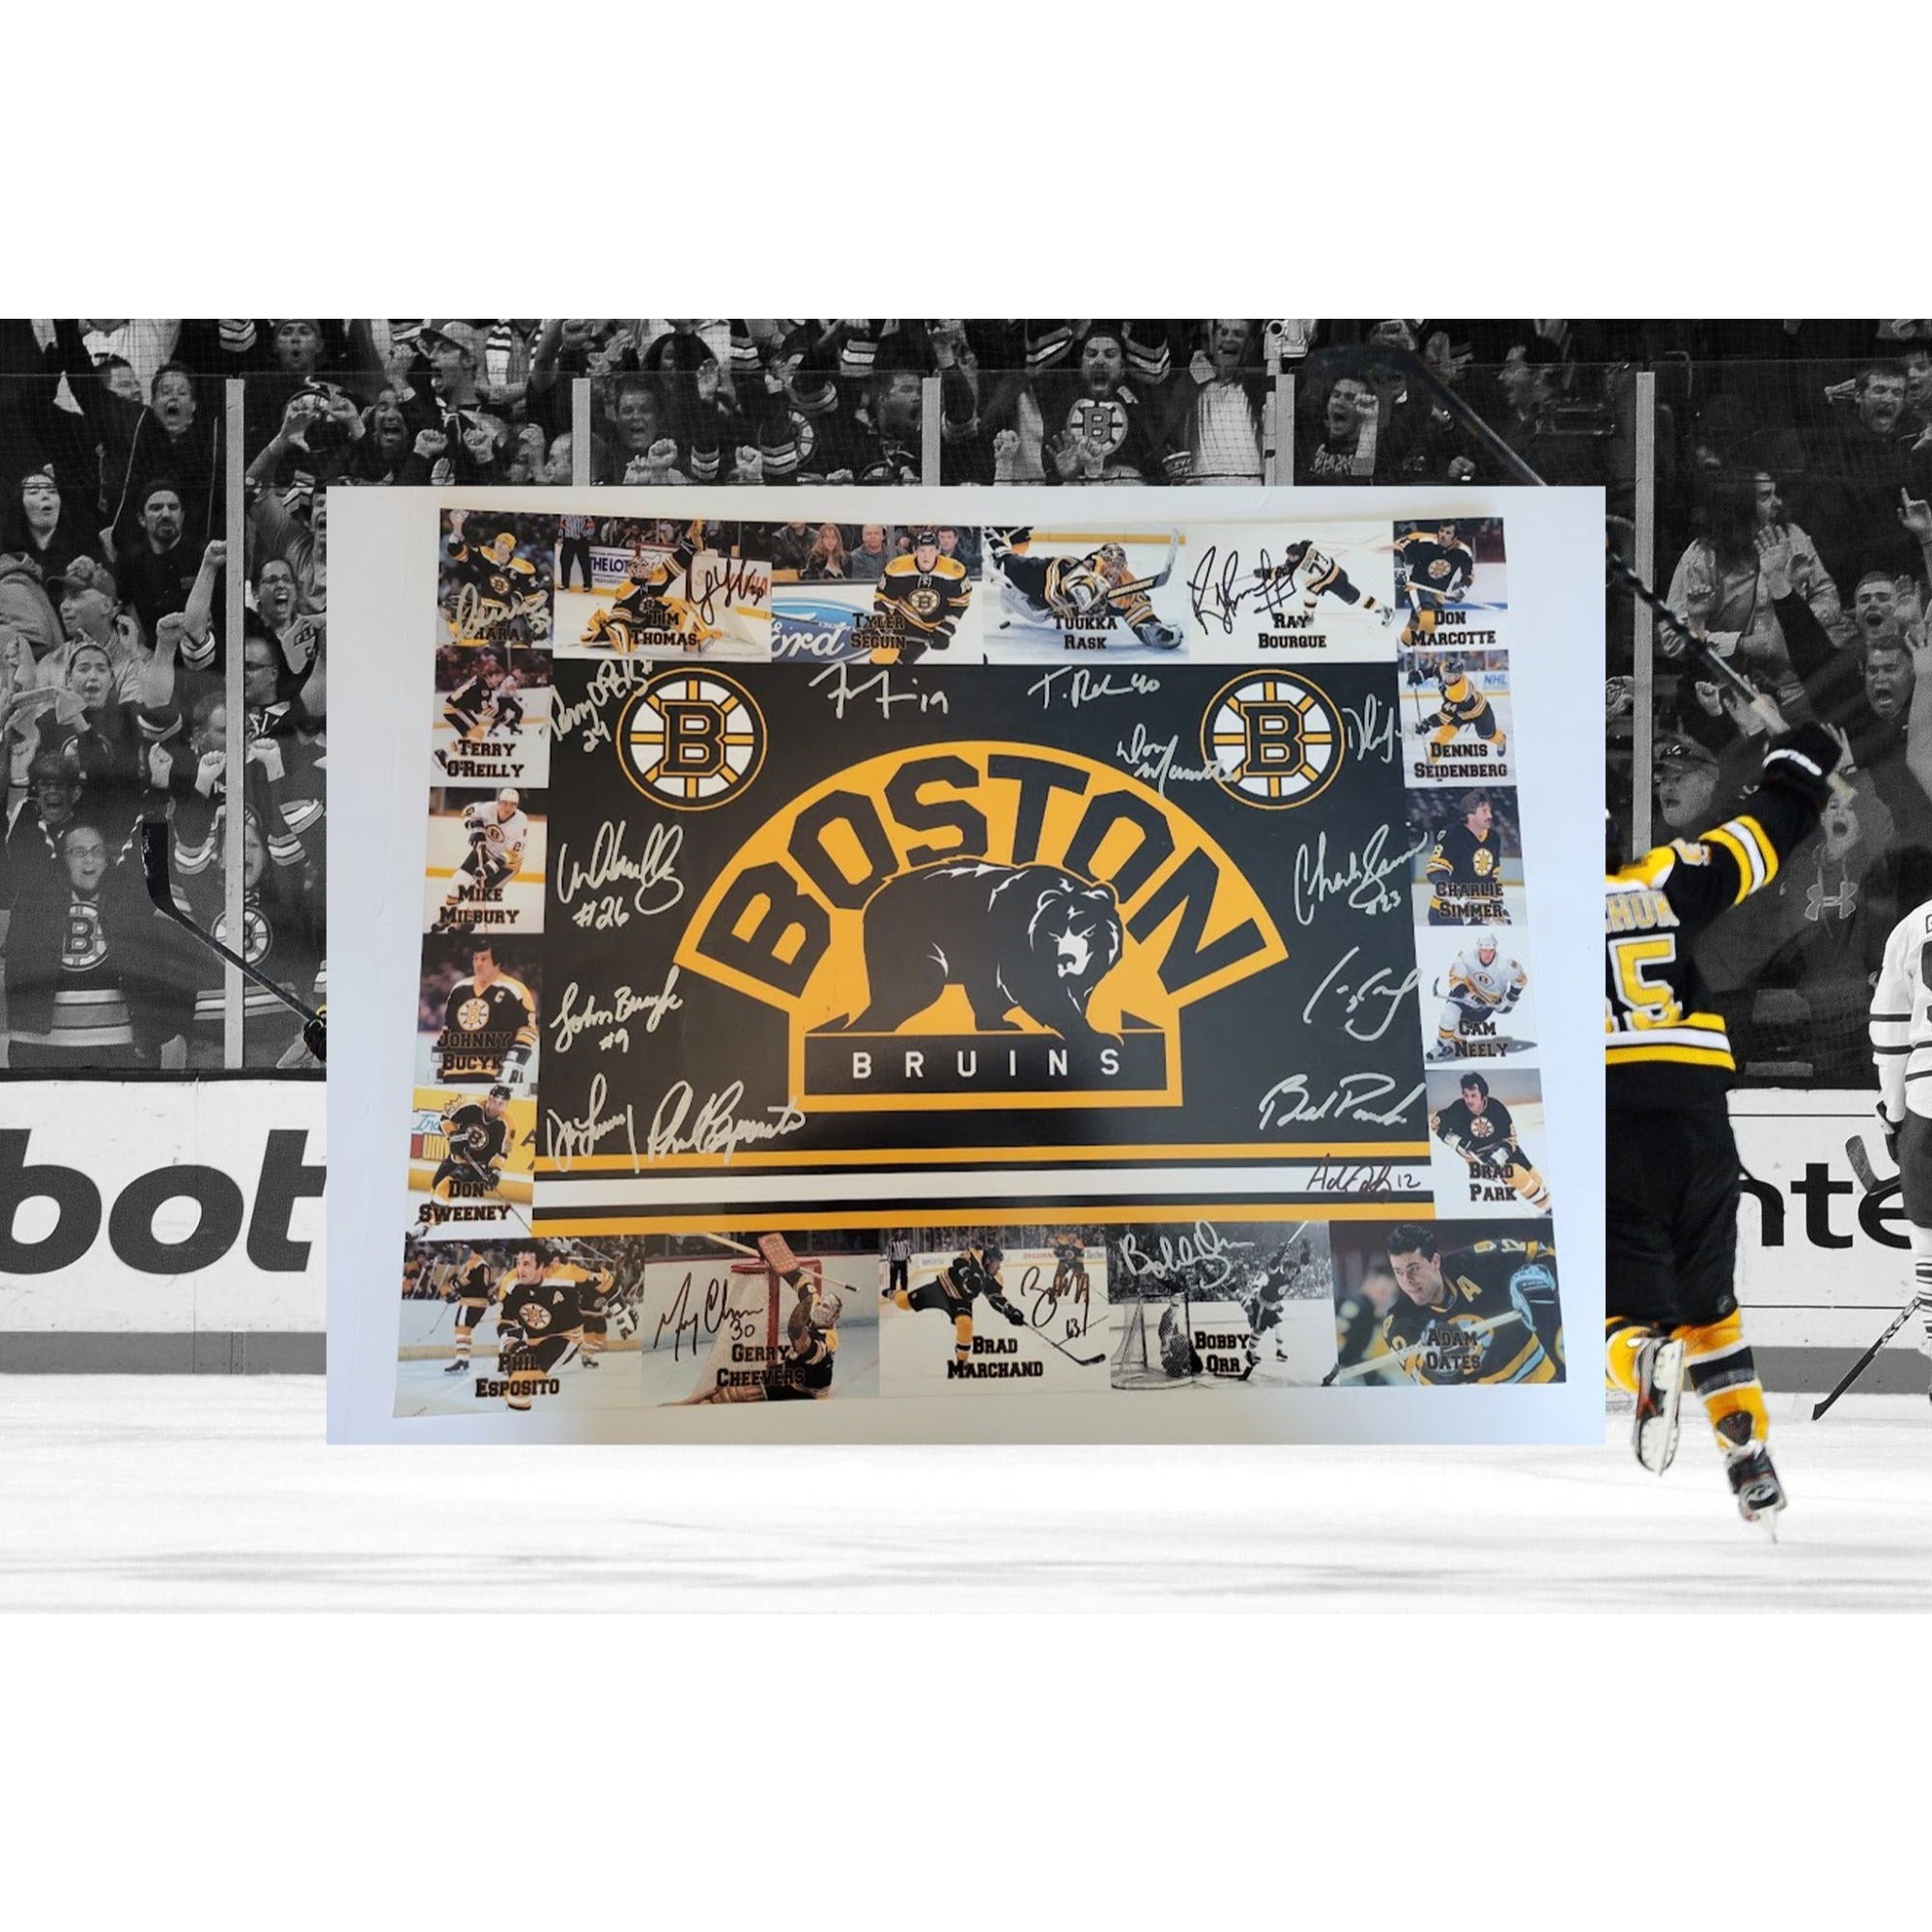 Boston Bruins Phil Esposito Gerry Cheevers Brad Marchand card Bobby Orr Brad Park Ray Bourque 19 all-time greats 16 x 20 photo signed